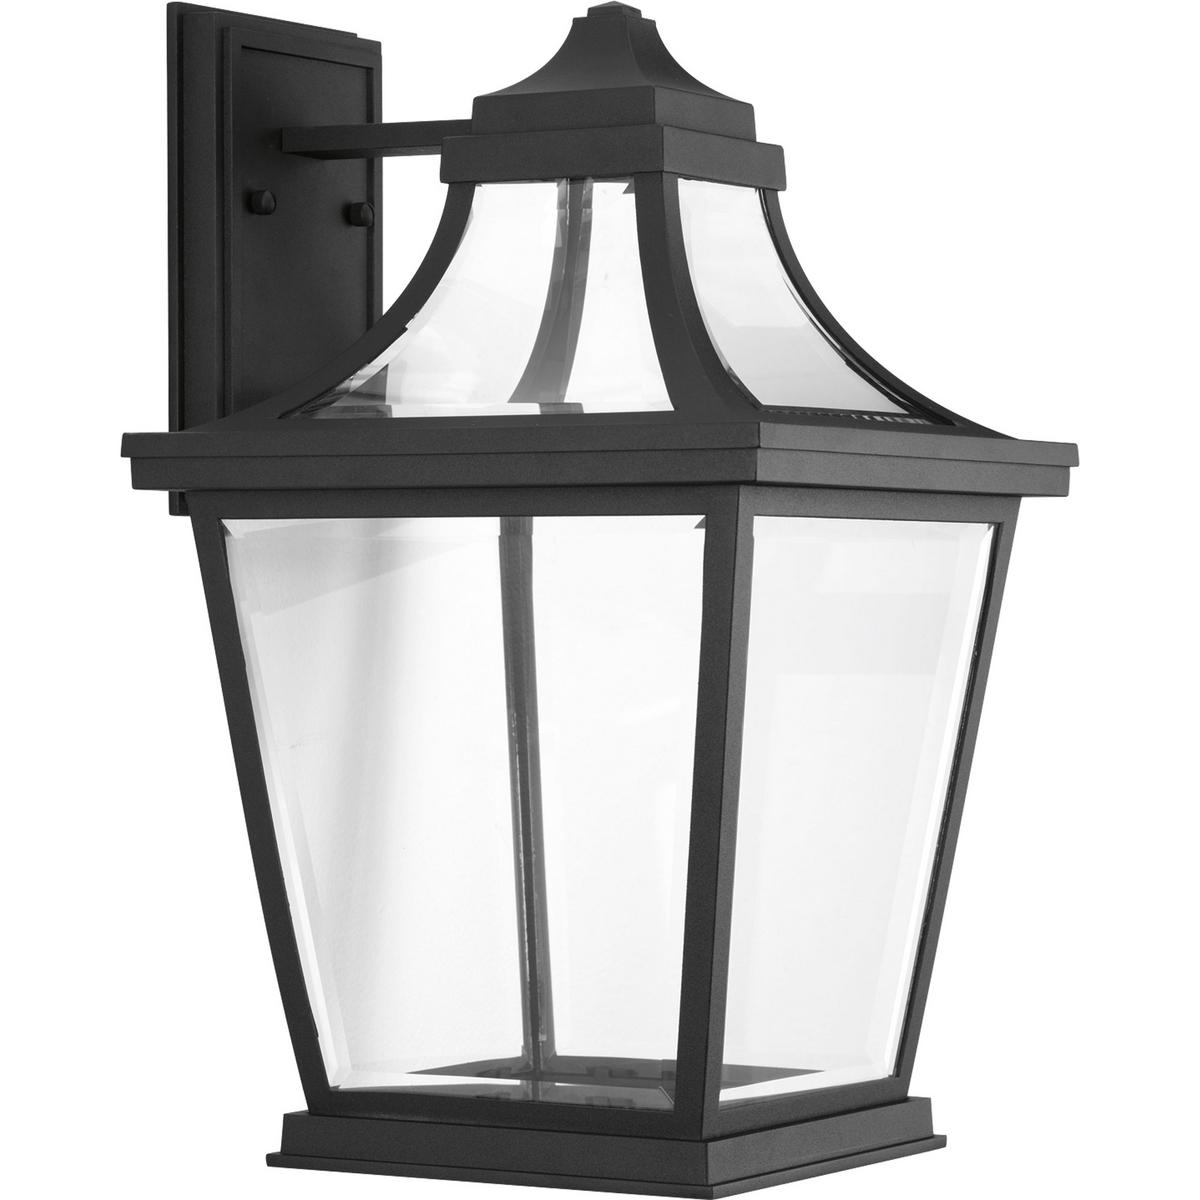 Hubbell P6058-3130K9 Endorse celebrates the traditional form of a gas-powered coach light with illumination from an LED source. A die-cast aluminum, powdered coated frame created and intriguing visual effect with the clear beveled glass. An optional fluted glass column is off